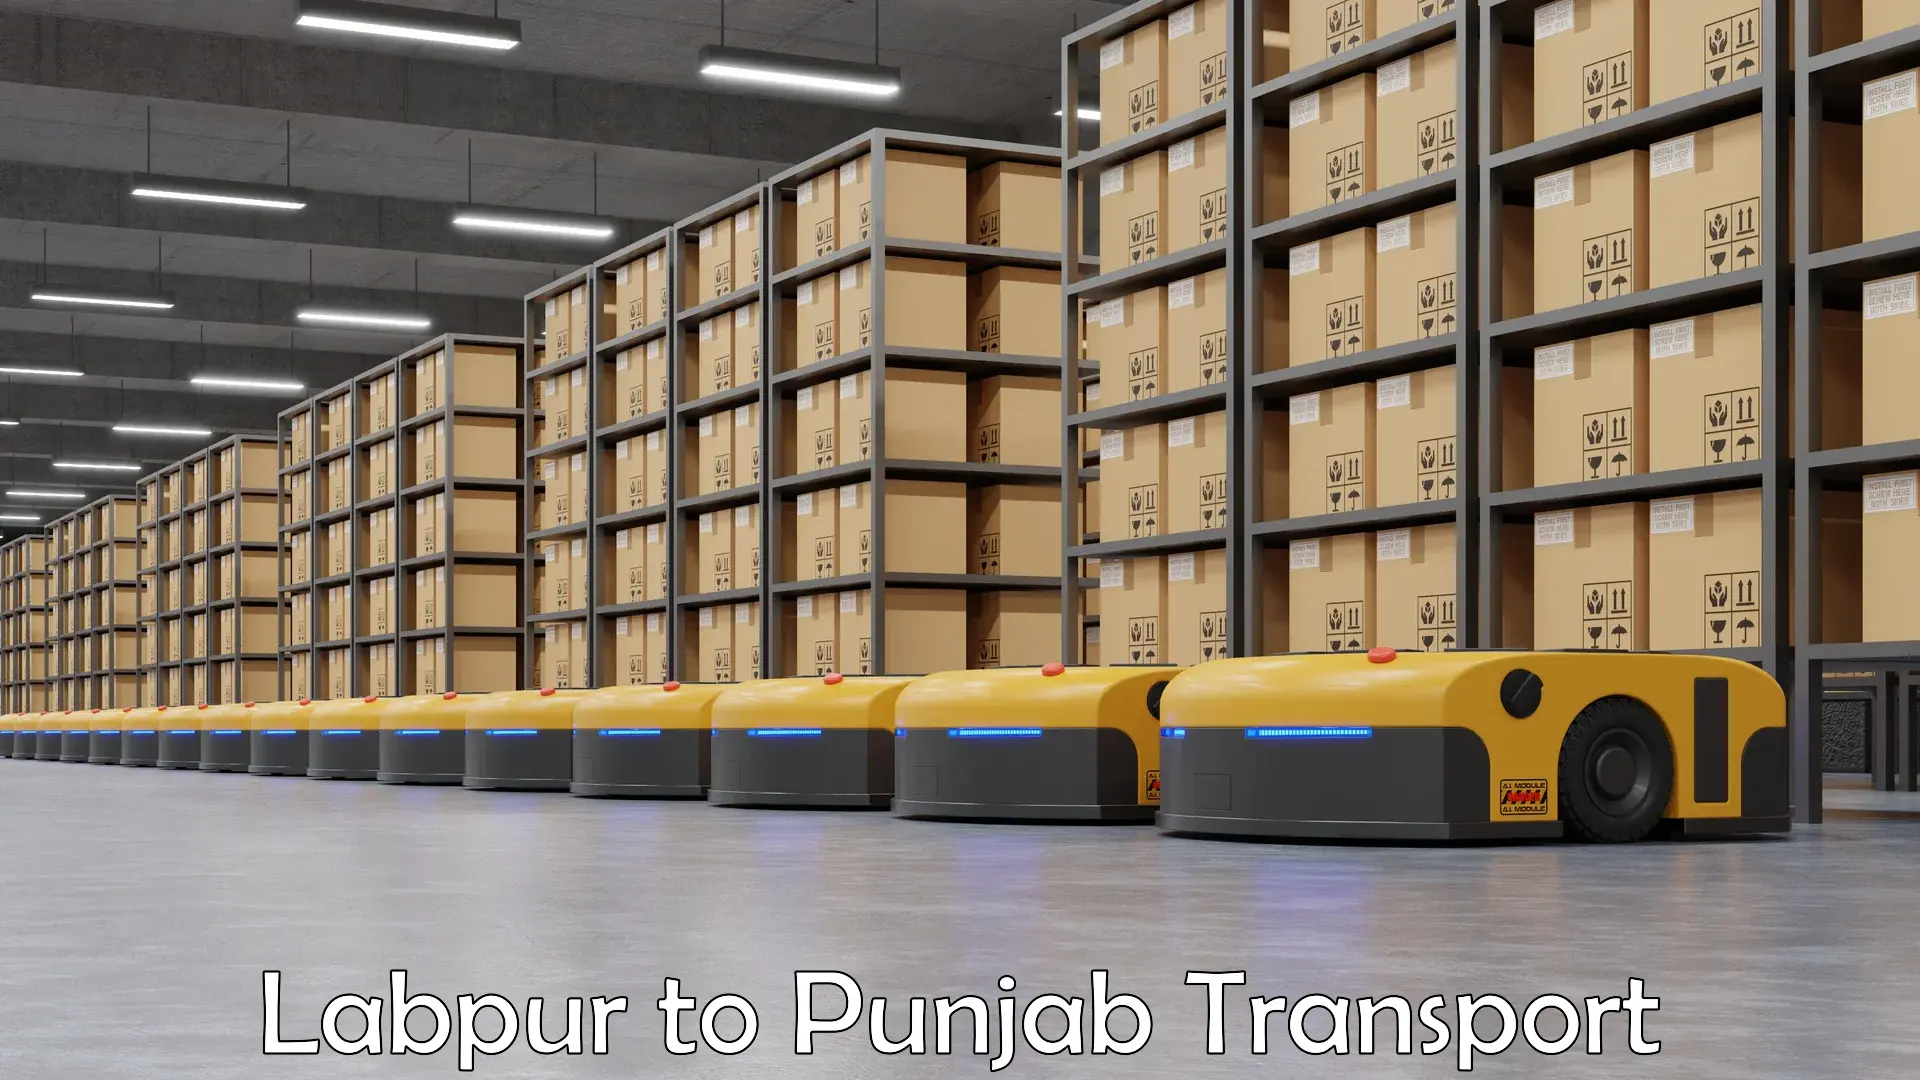 Vehicle transport services in Labpur to Faridkot